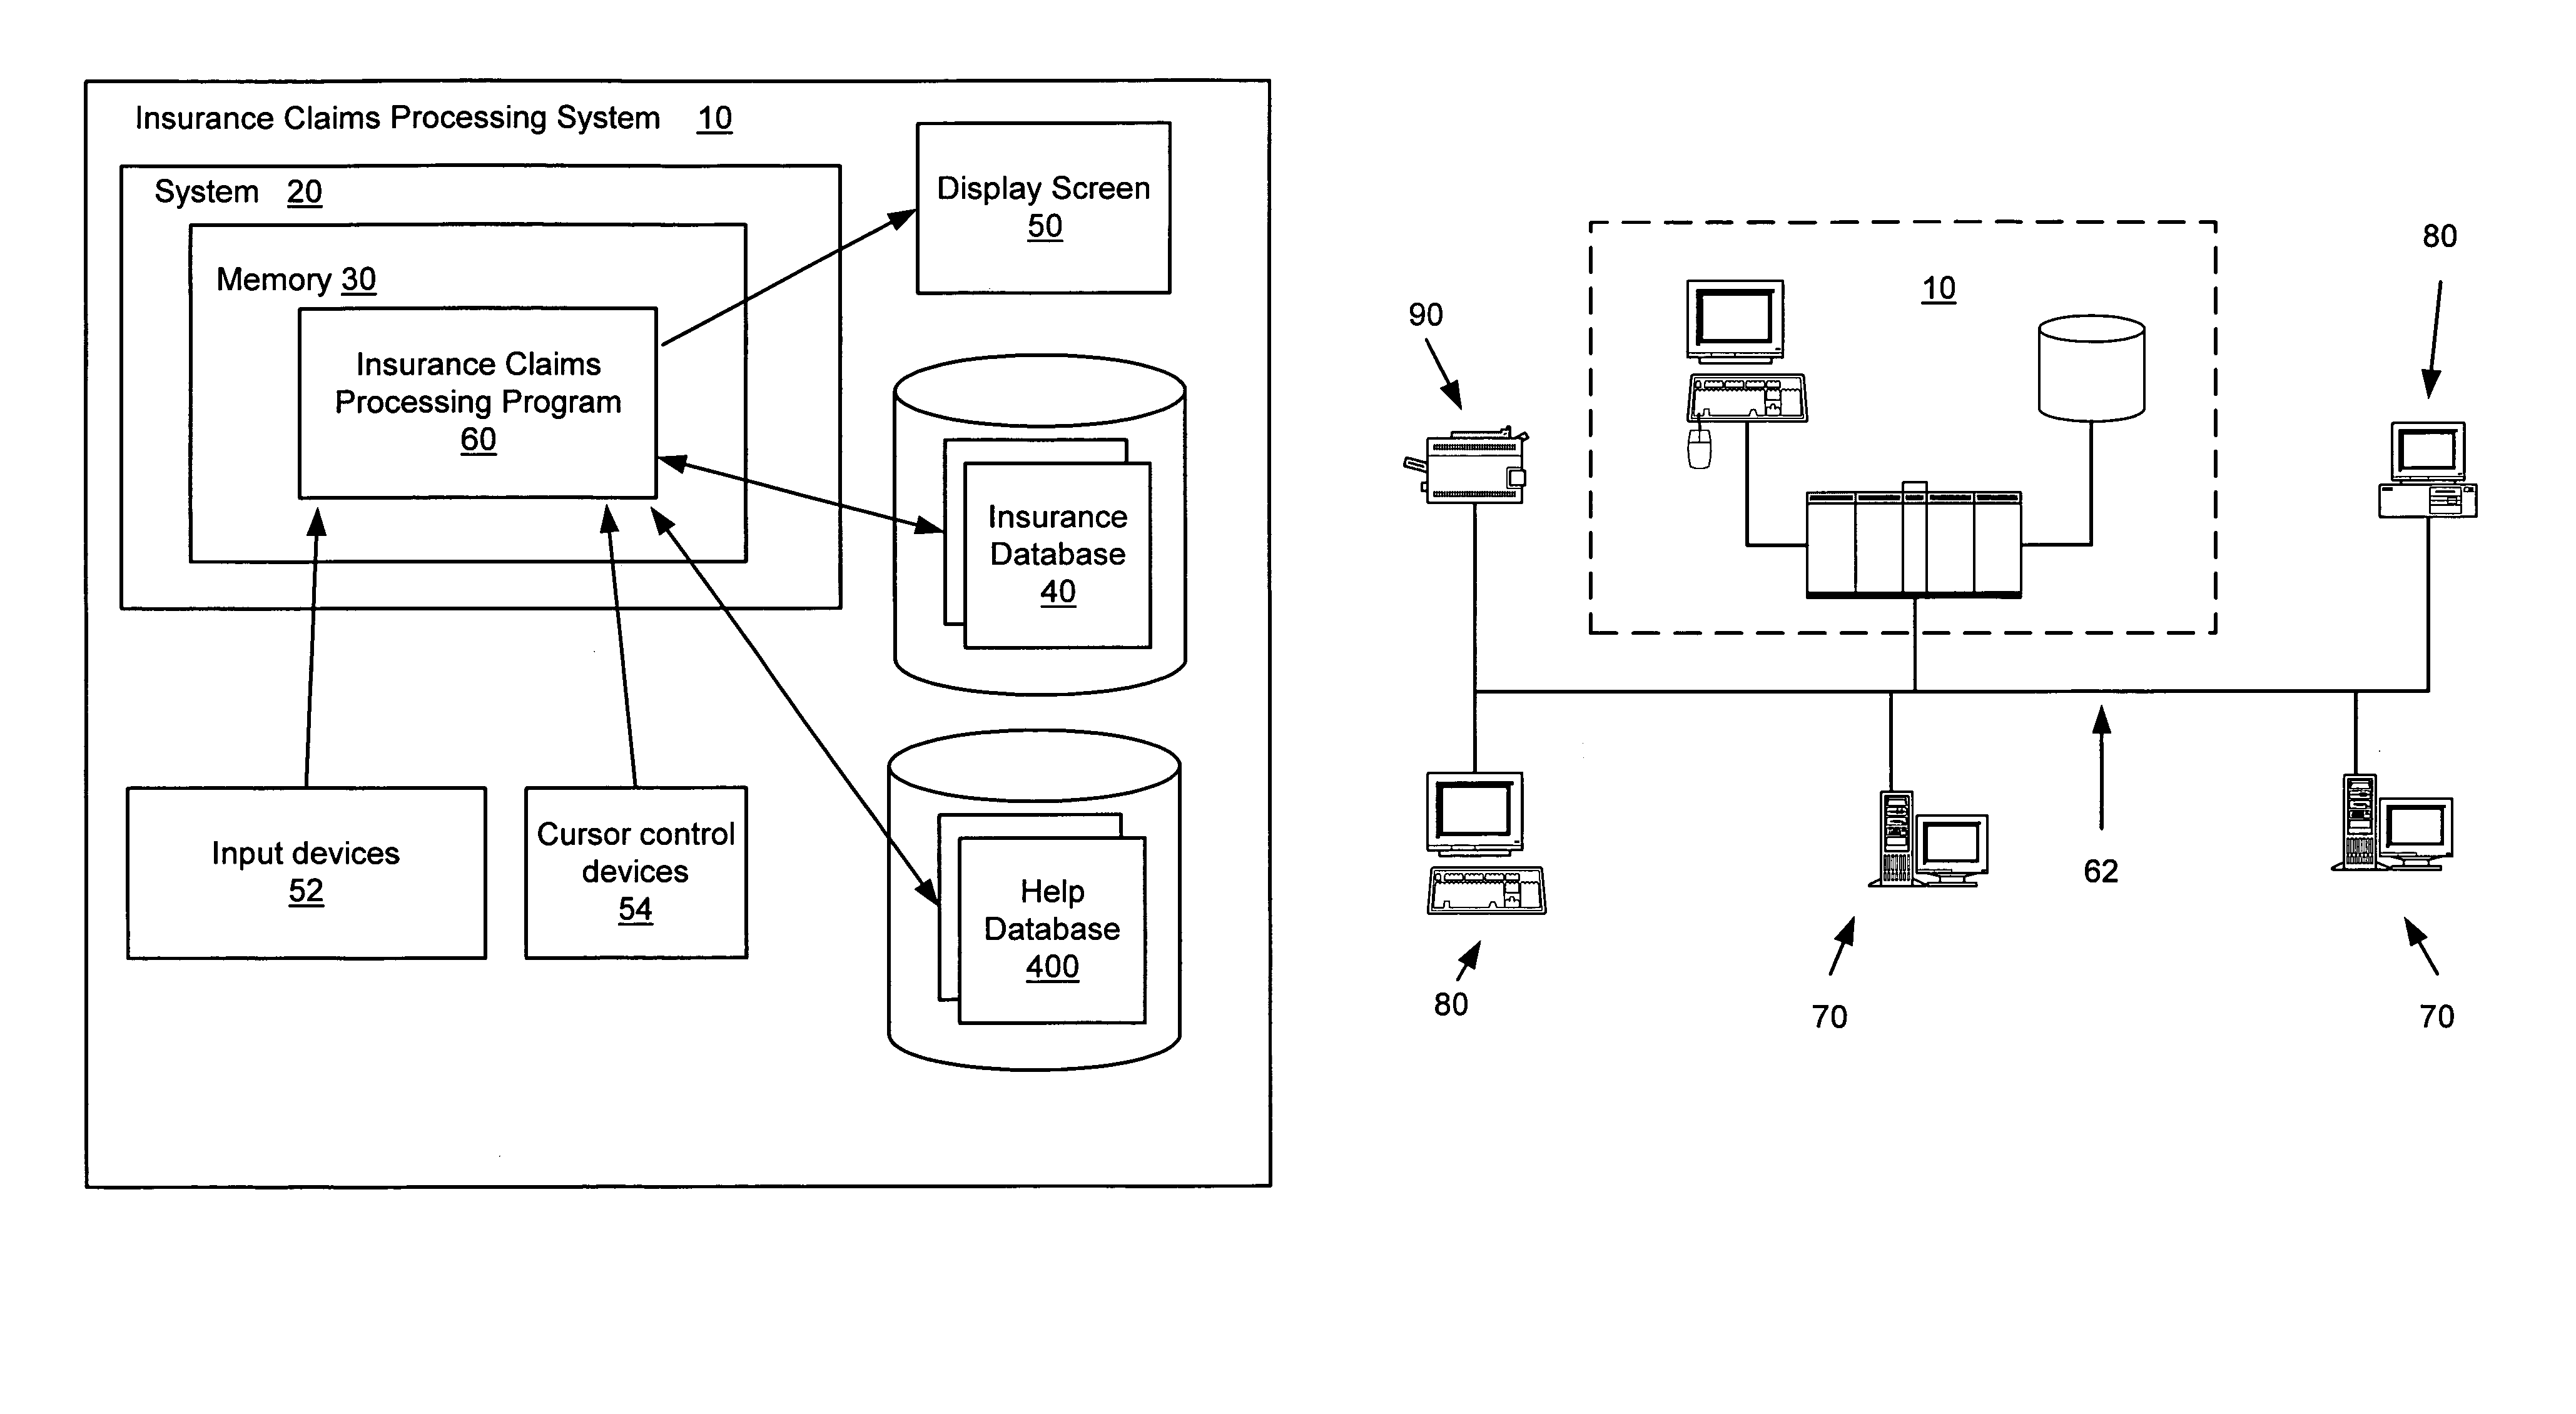 Dynamic help method and system for an insurance claims processing system